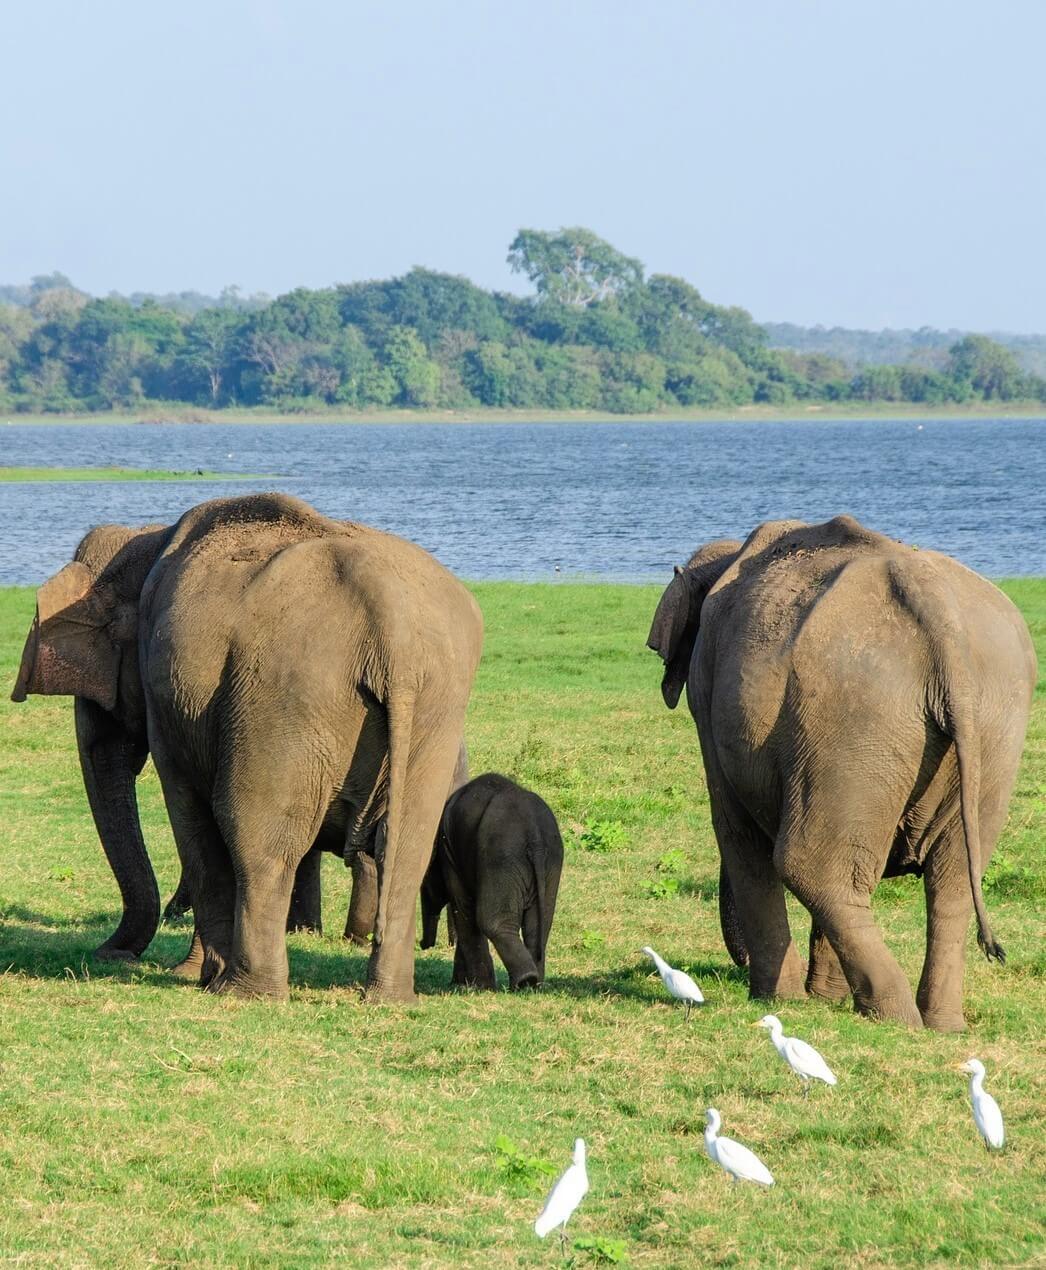 Yala National Park, Sri Lanka. In the image are the bottoms of Elephants going to drink water. Please do not miss the youngster in the middle, protected by the Old Dames